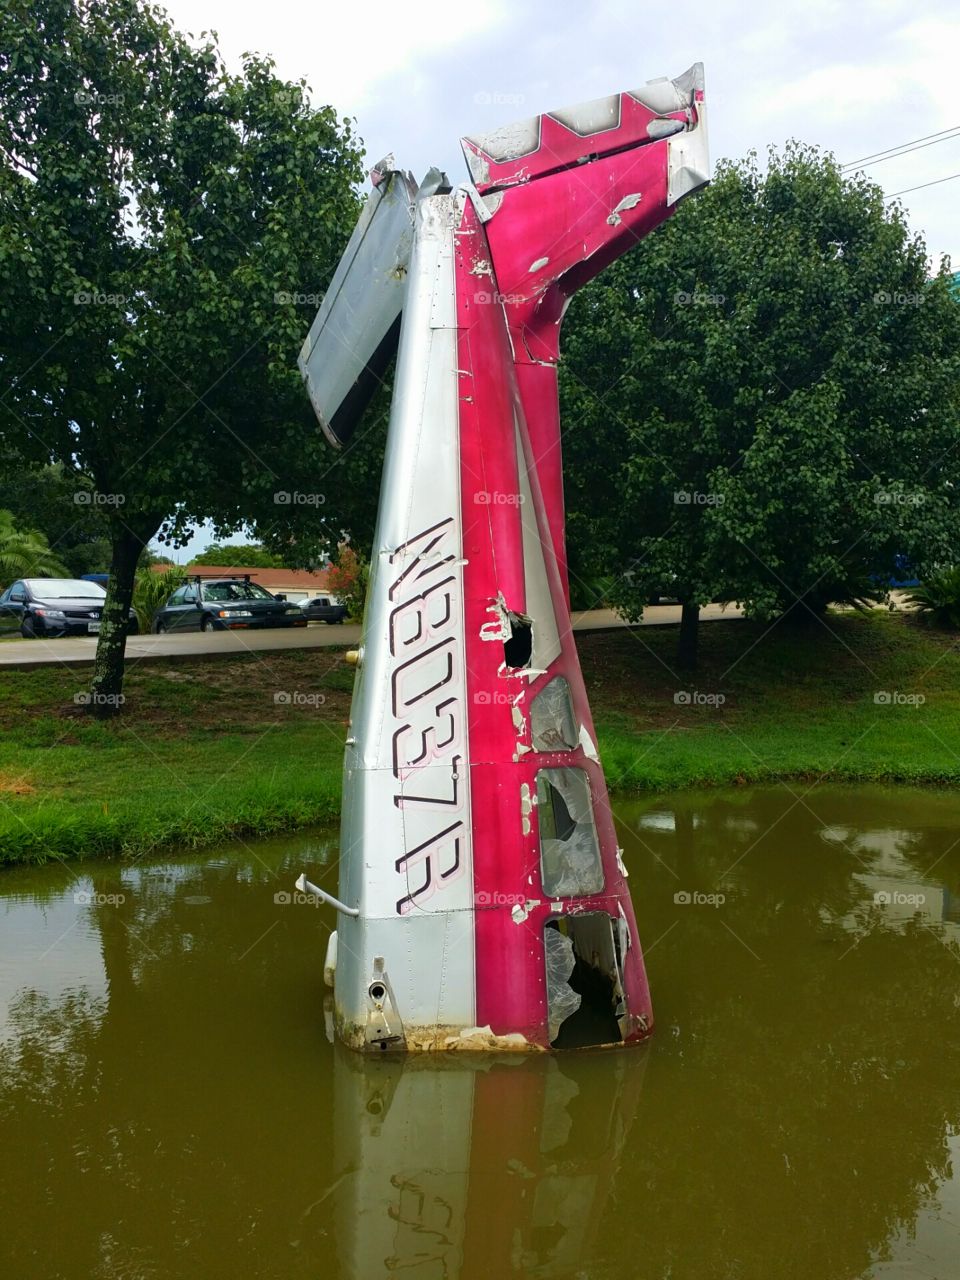 Just a Wrecked Plane. Small plane used as an attention-getter in front of a business.